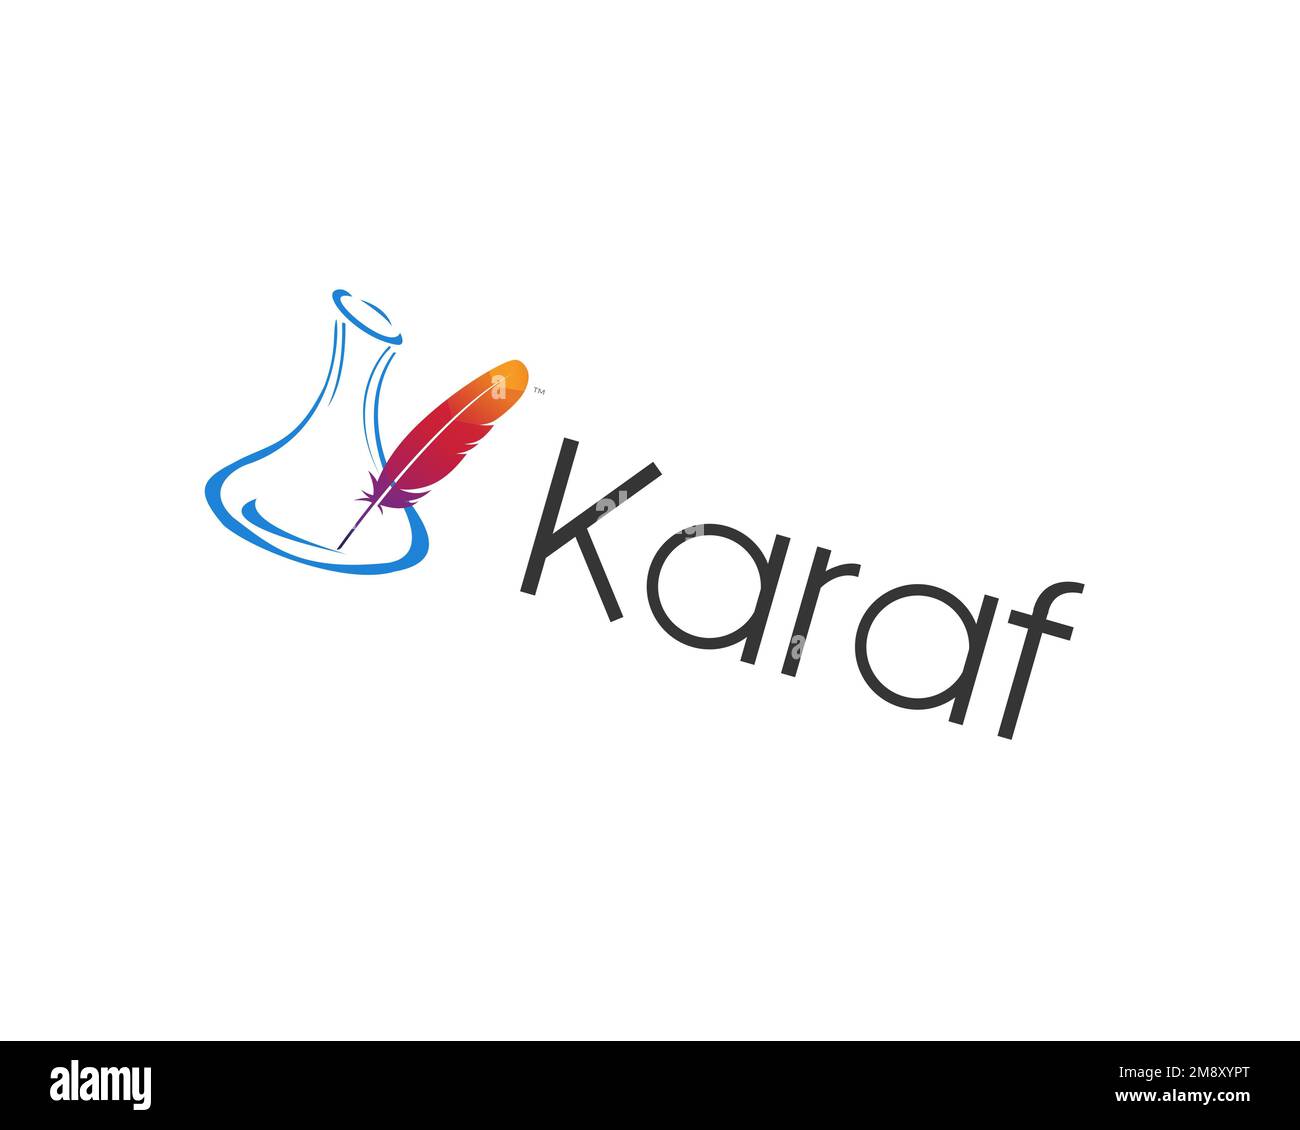 Karaf Cut Out Stock Images & Pictures - Alamy